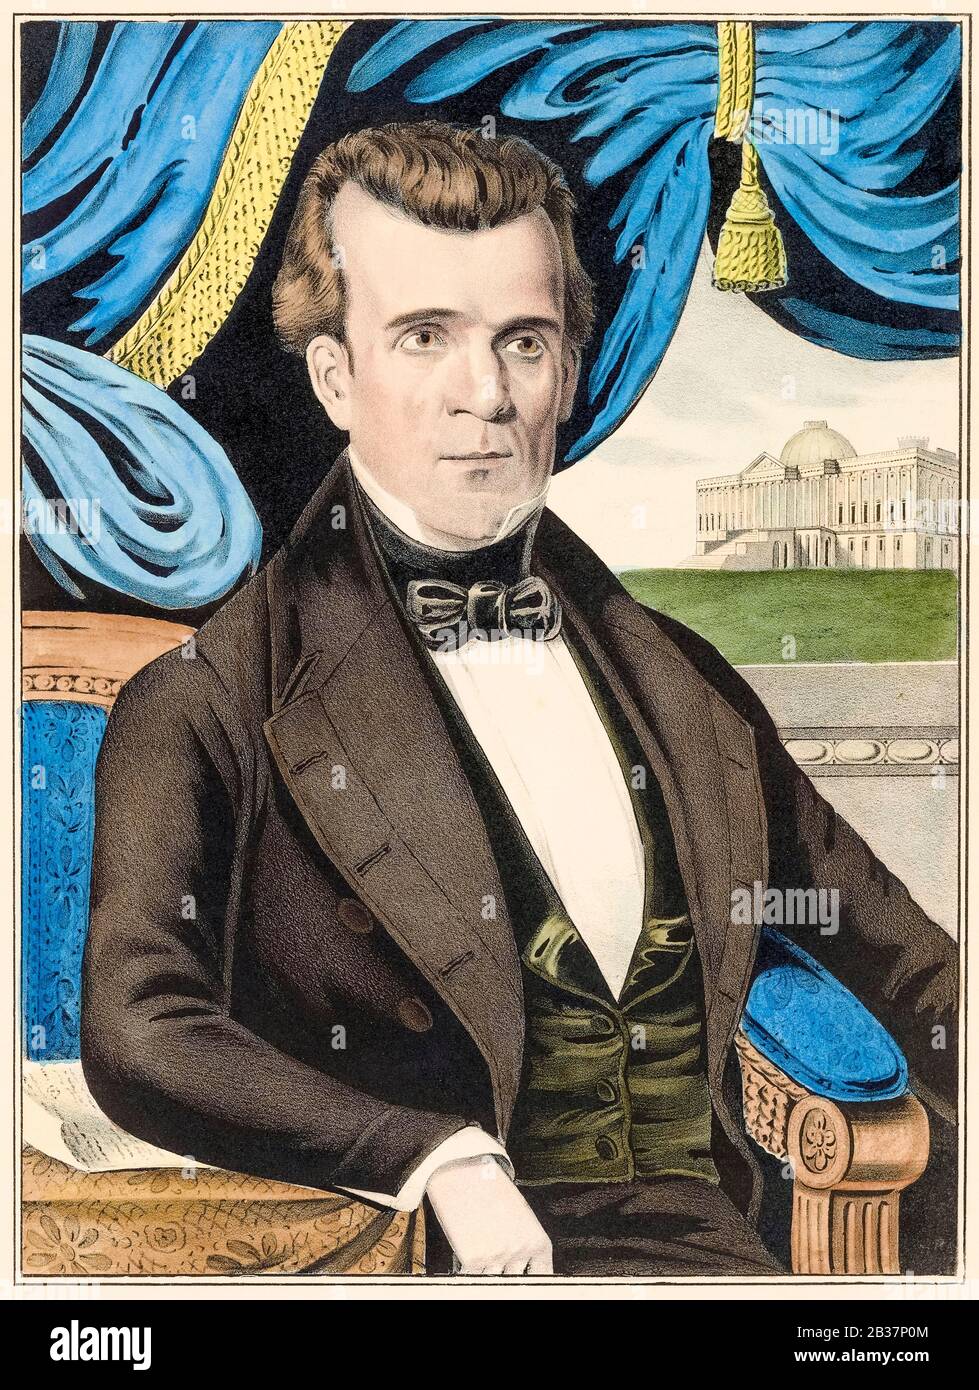 James K Polk (1795-1849), Eleventh President of the United States, portrait print by Nathaniel Currier, 1845-1849 Stock Photo